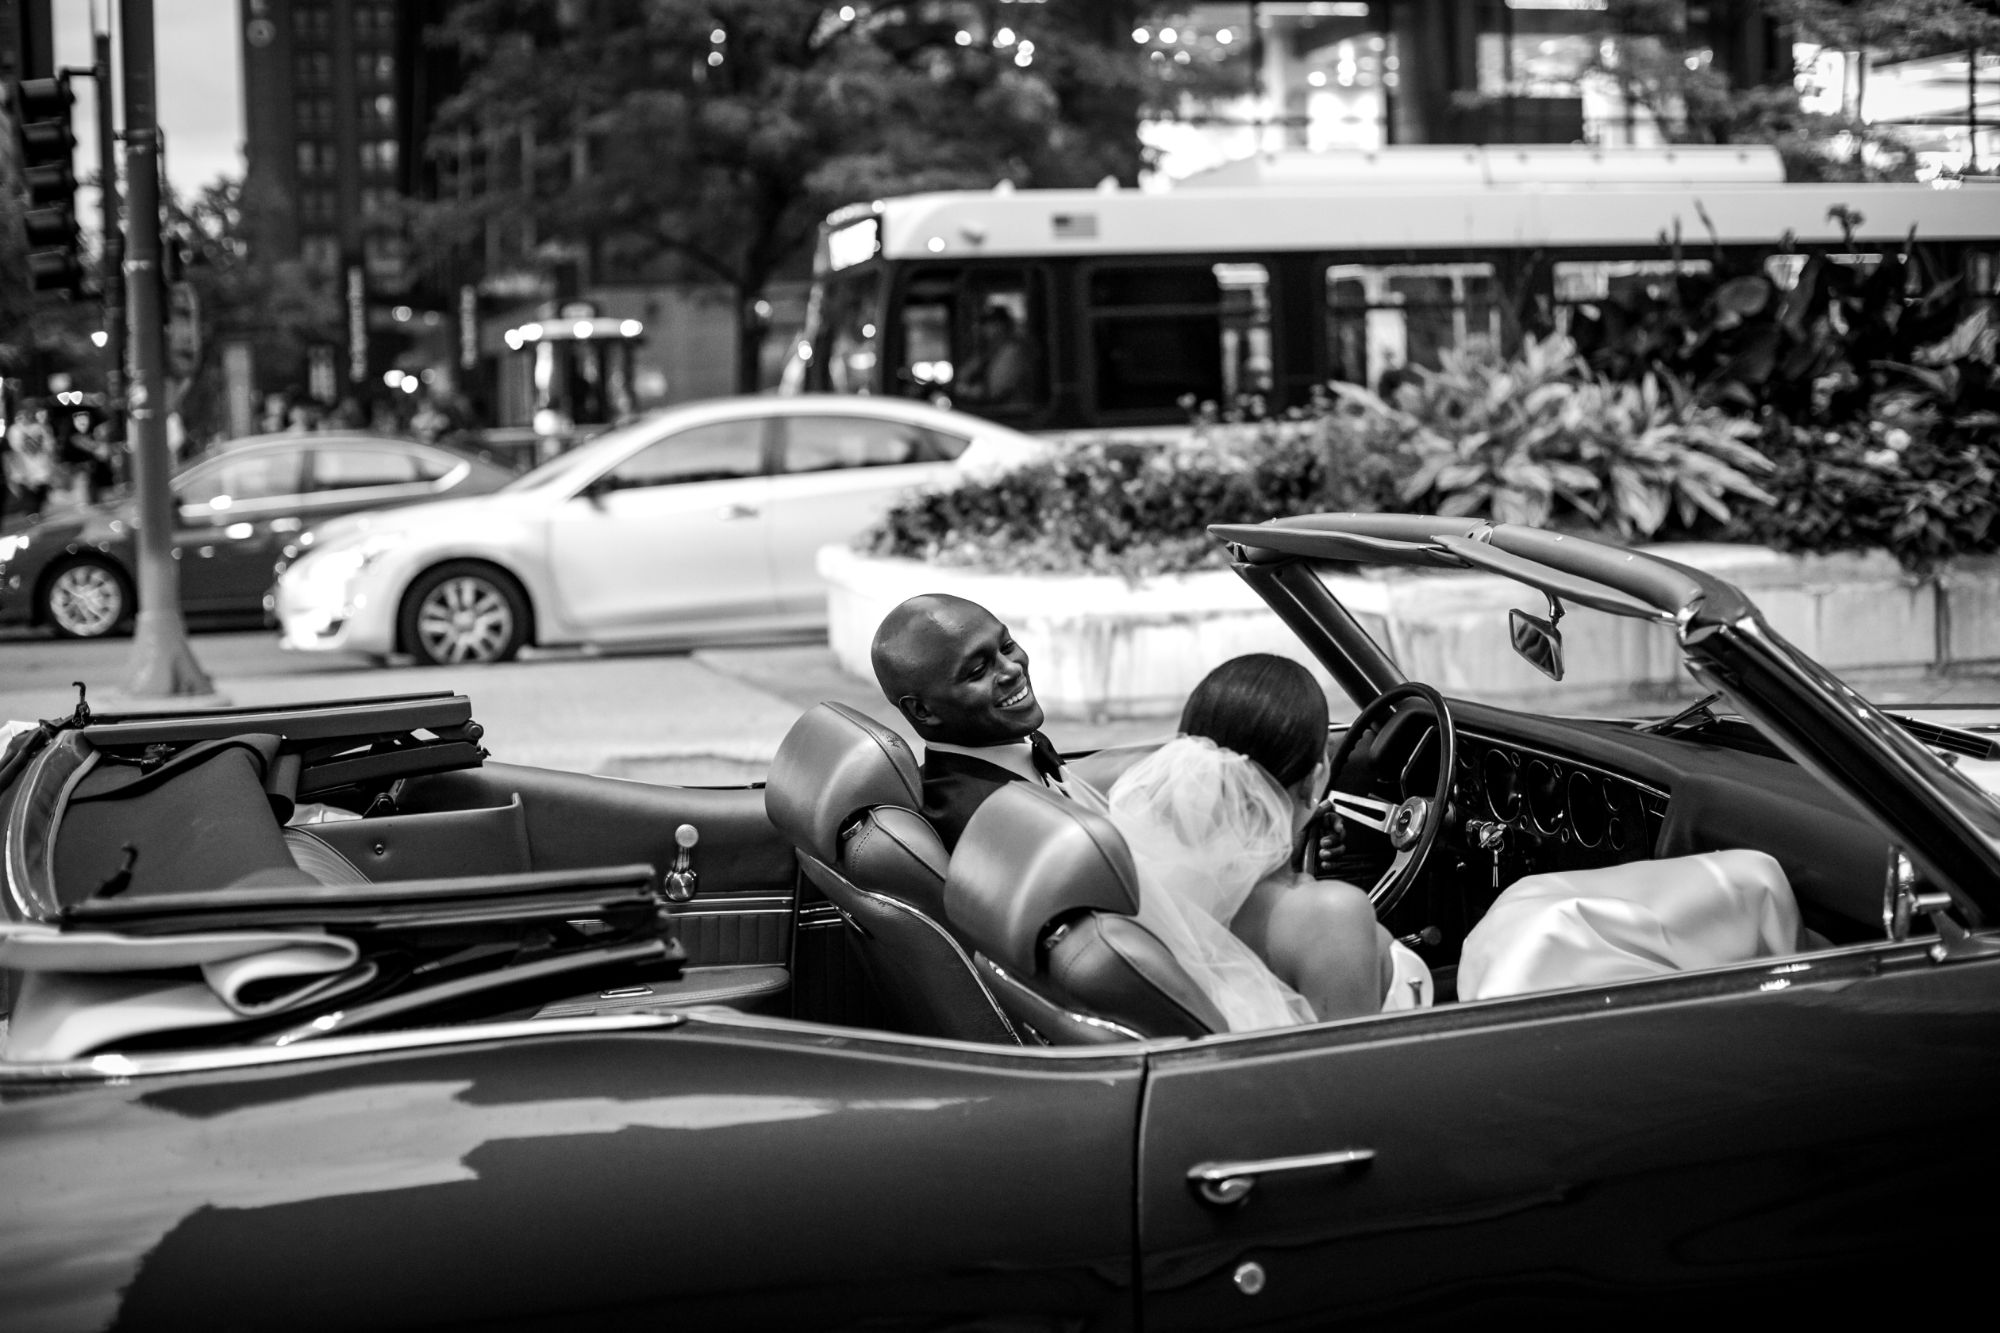 Groom smiling at his new bride in top-down convertible car.